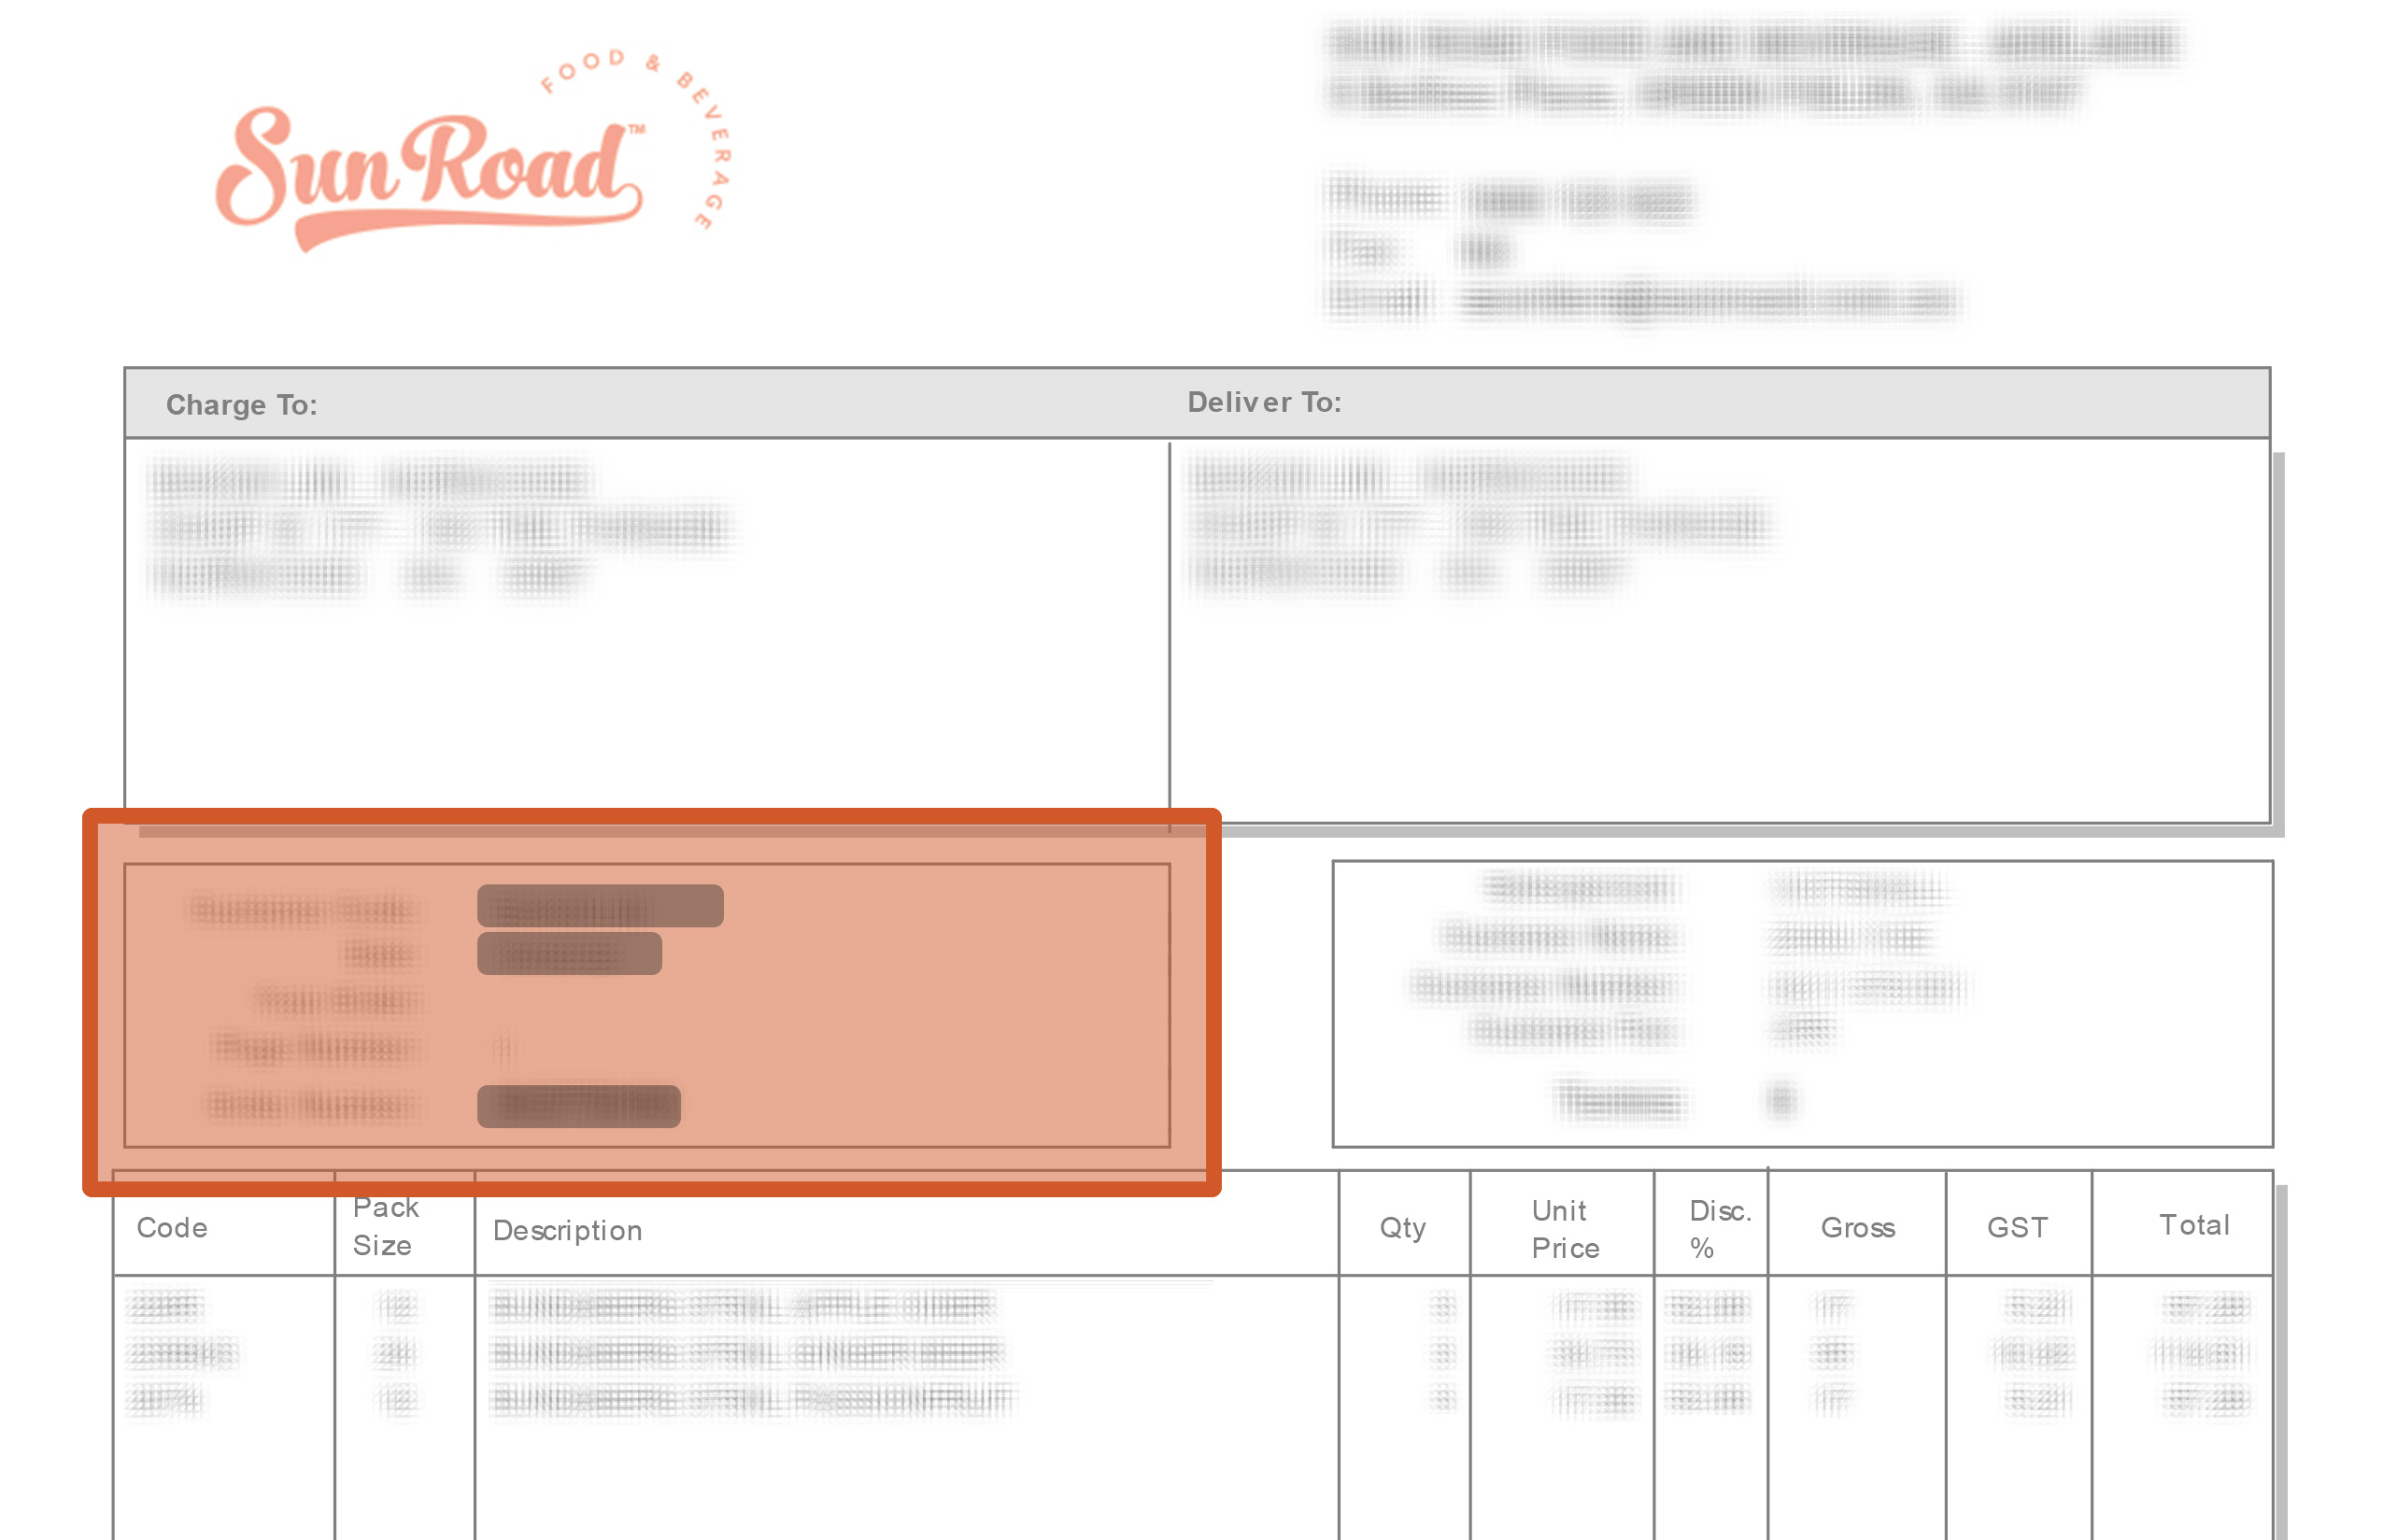 Sun Road Invoice with details highlighted.